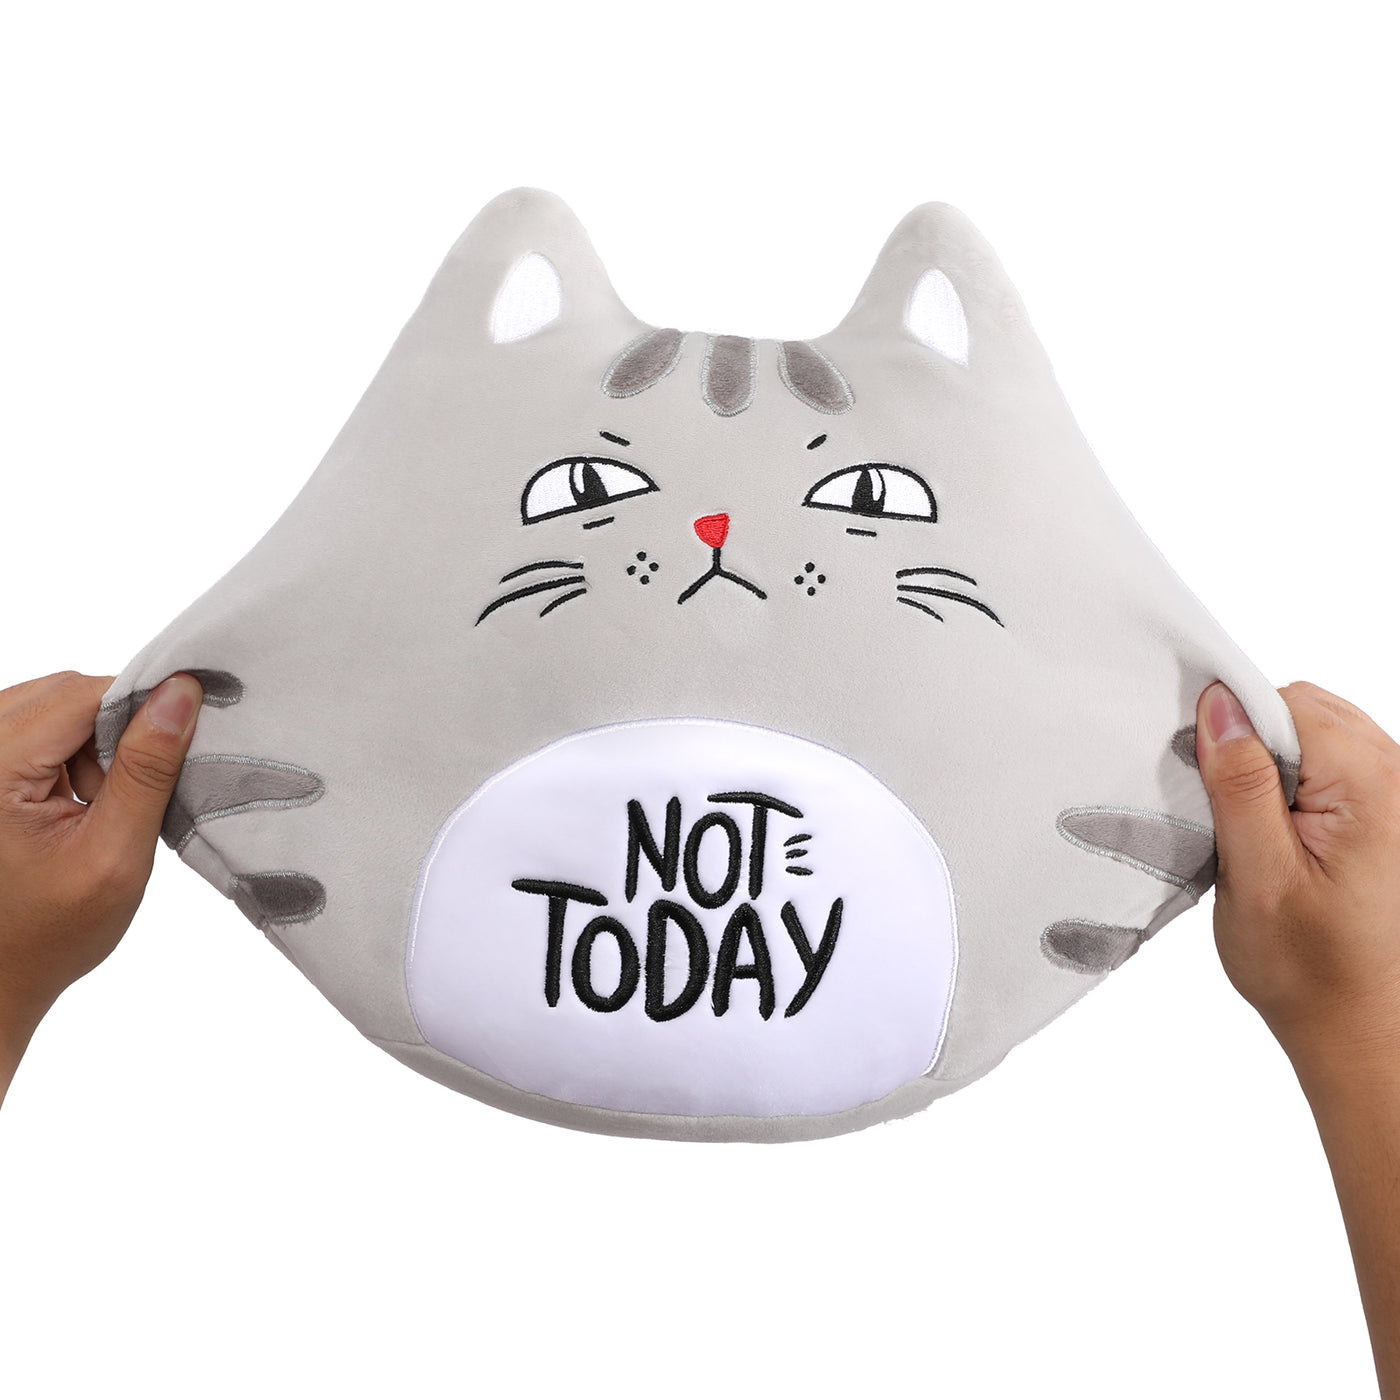 Not Today - Cat Plush Toy, 10 Inches - MorisMos Stuffed Animals